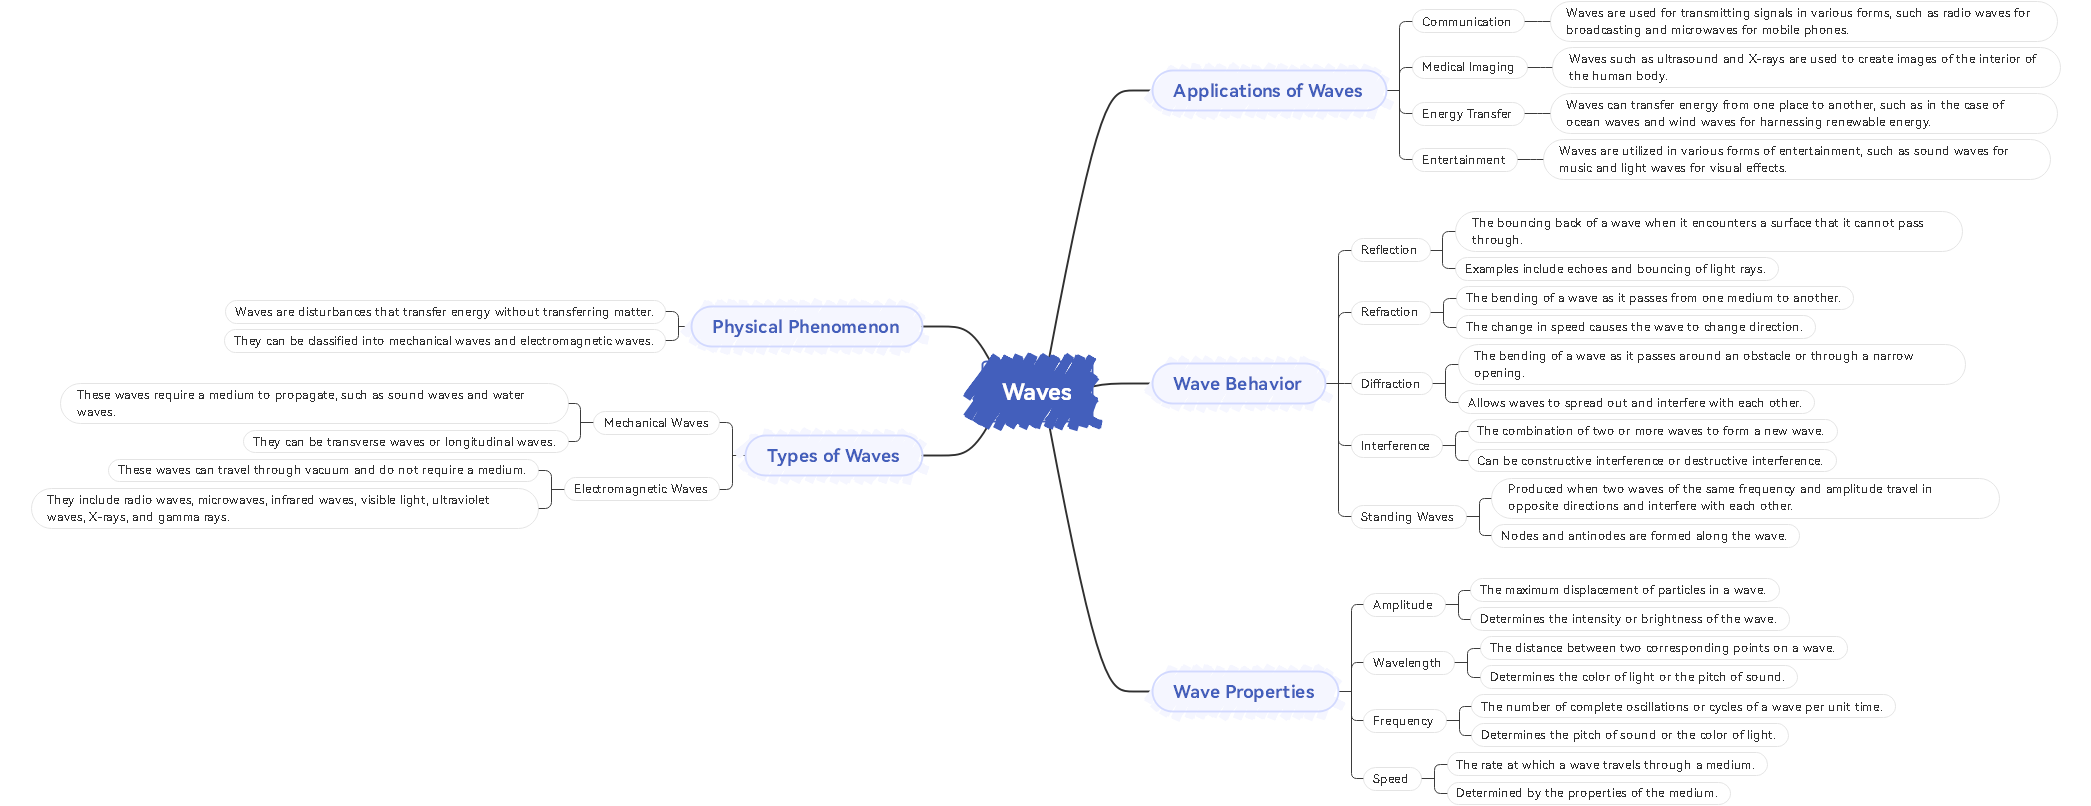 Reverse Waves Template for Waves Concept Map